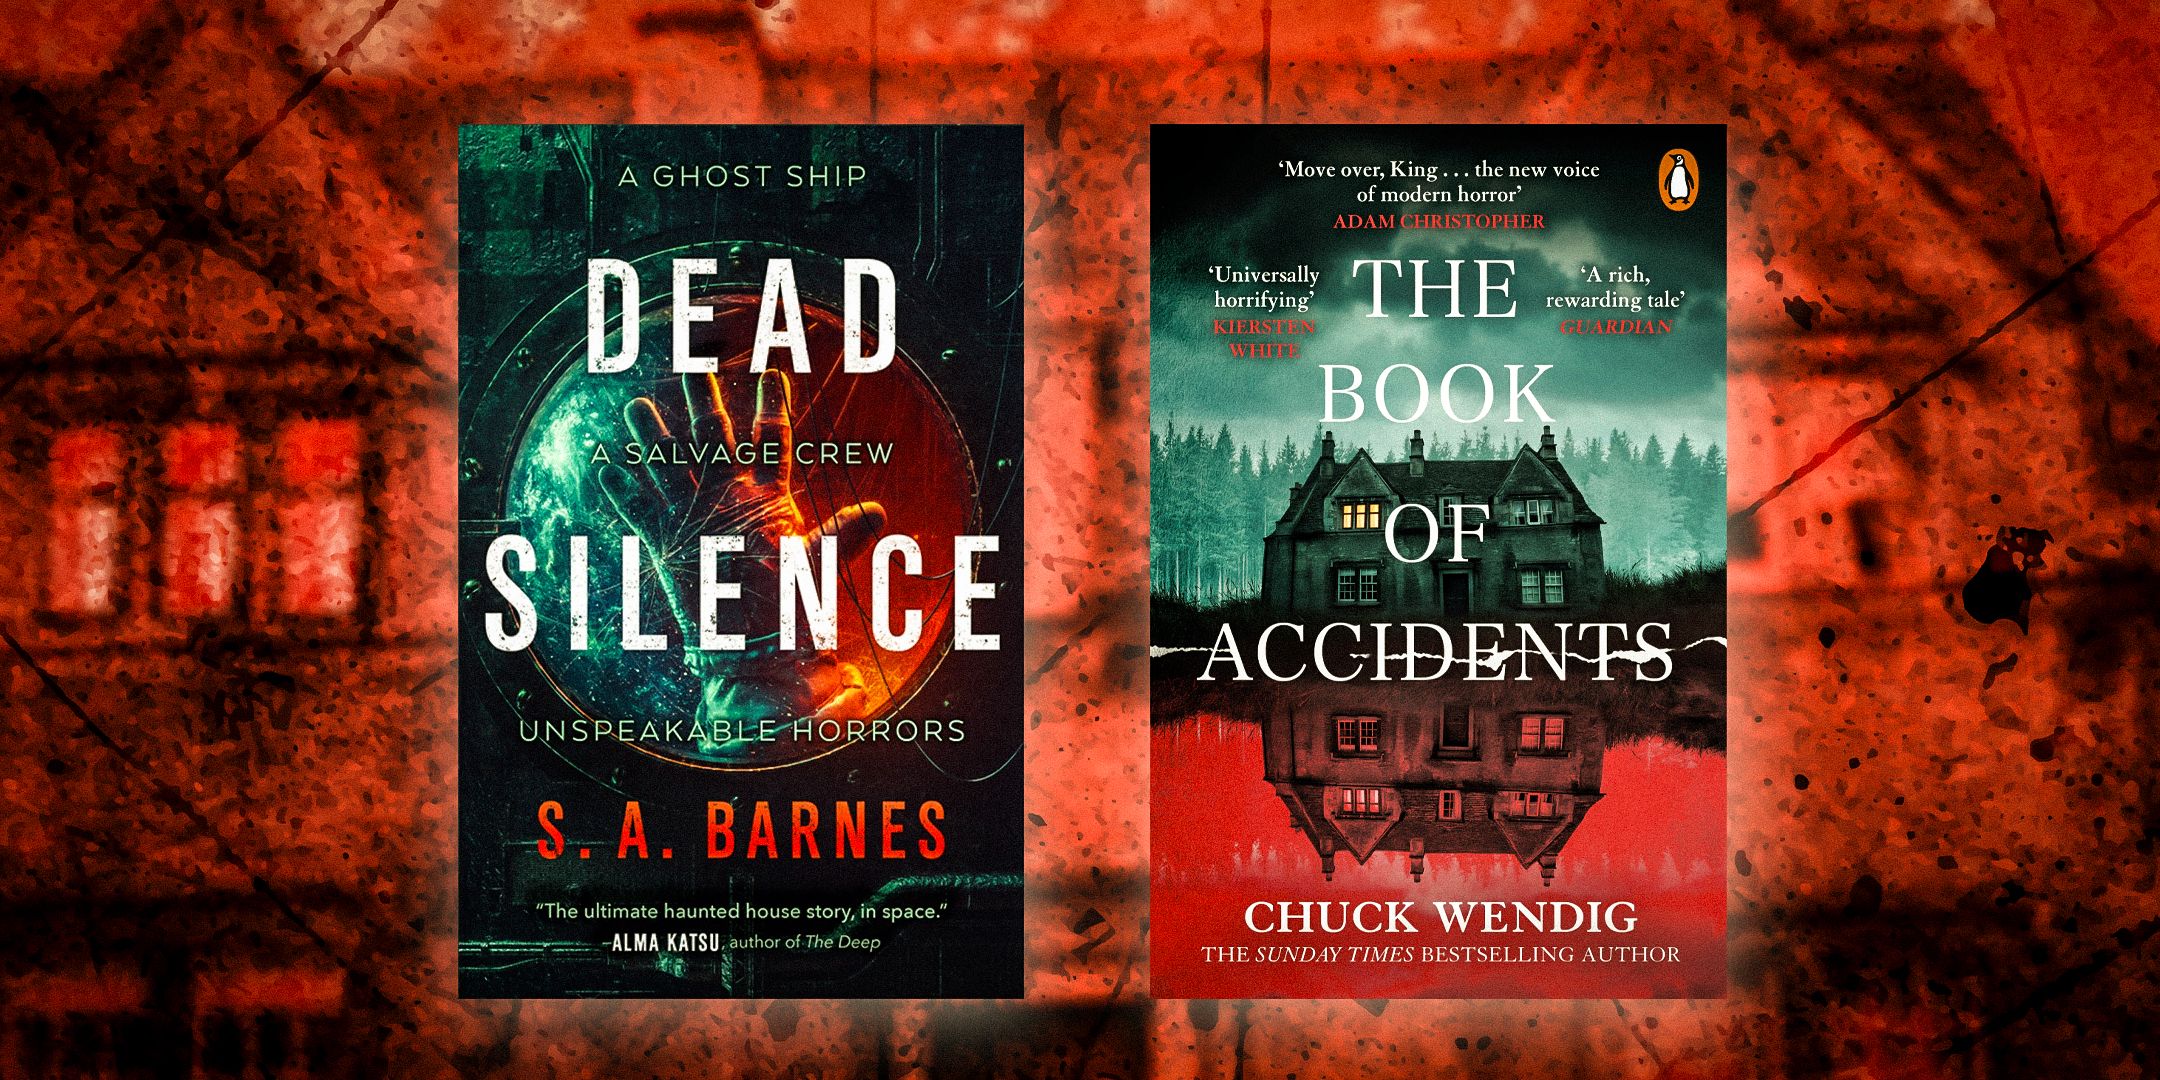 Book-Covers-of-Dead-Silence-by-S.A